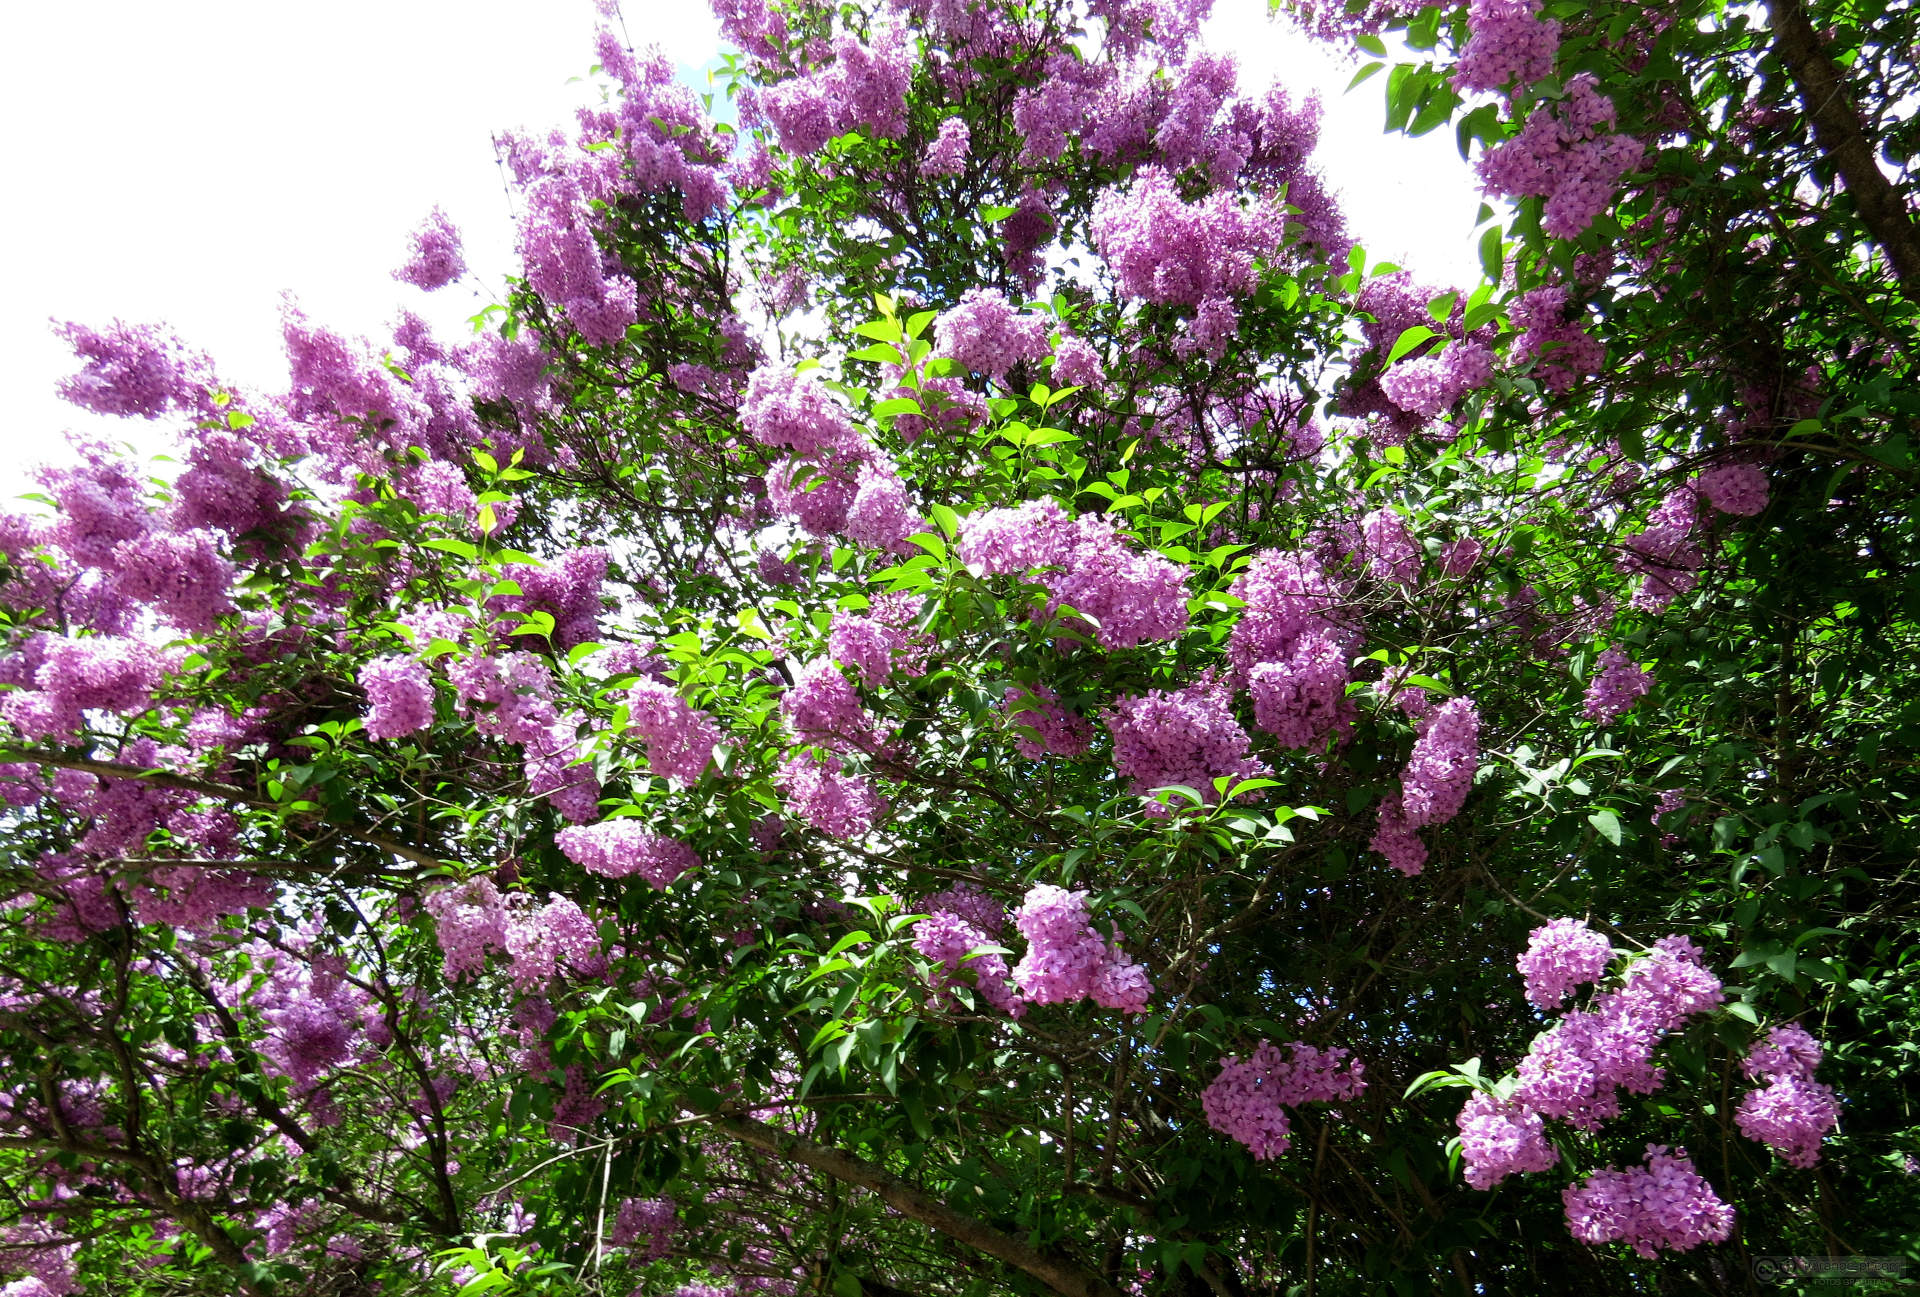 When to Prune Lilac Bushes